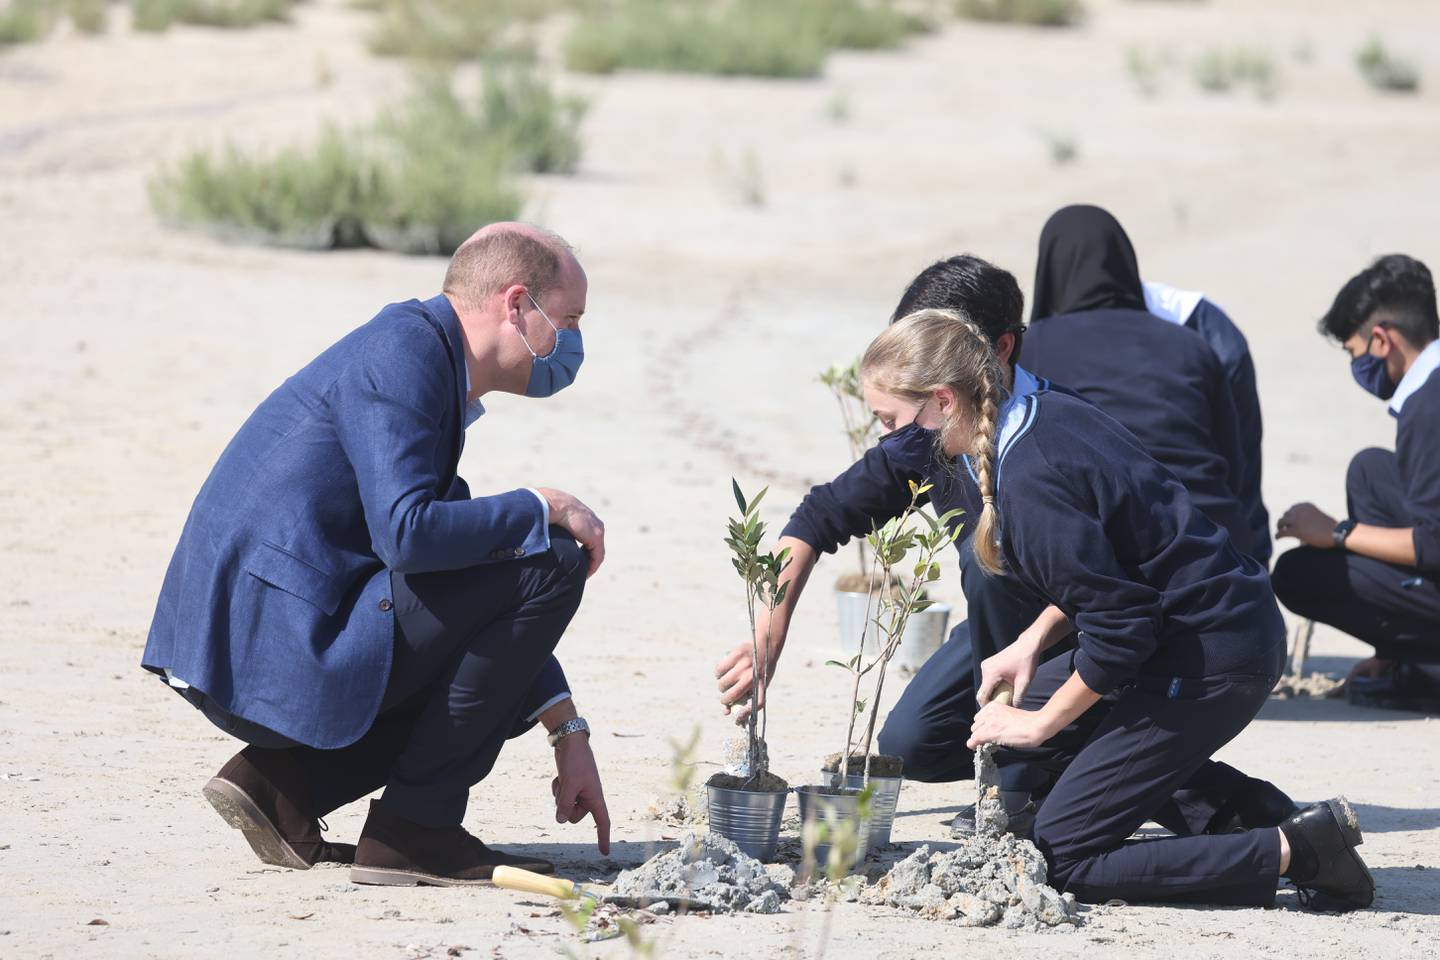 Britain's Prince William, Duke of Cambridge, plants trees alongside two school children as he tours Abu Dhabi's wetlands at the Jubail Mangrove Park during an official visit to the UAE on February 10, 2022. PA Wire